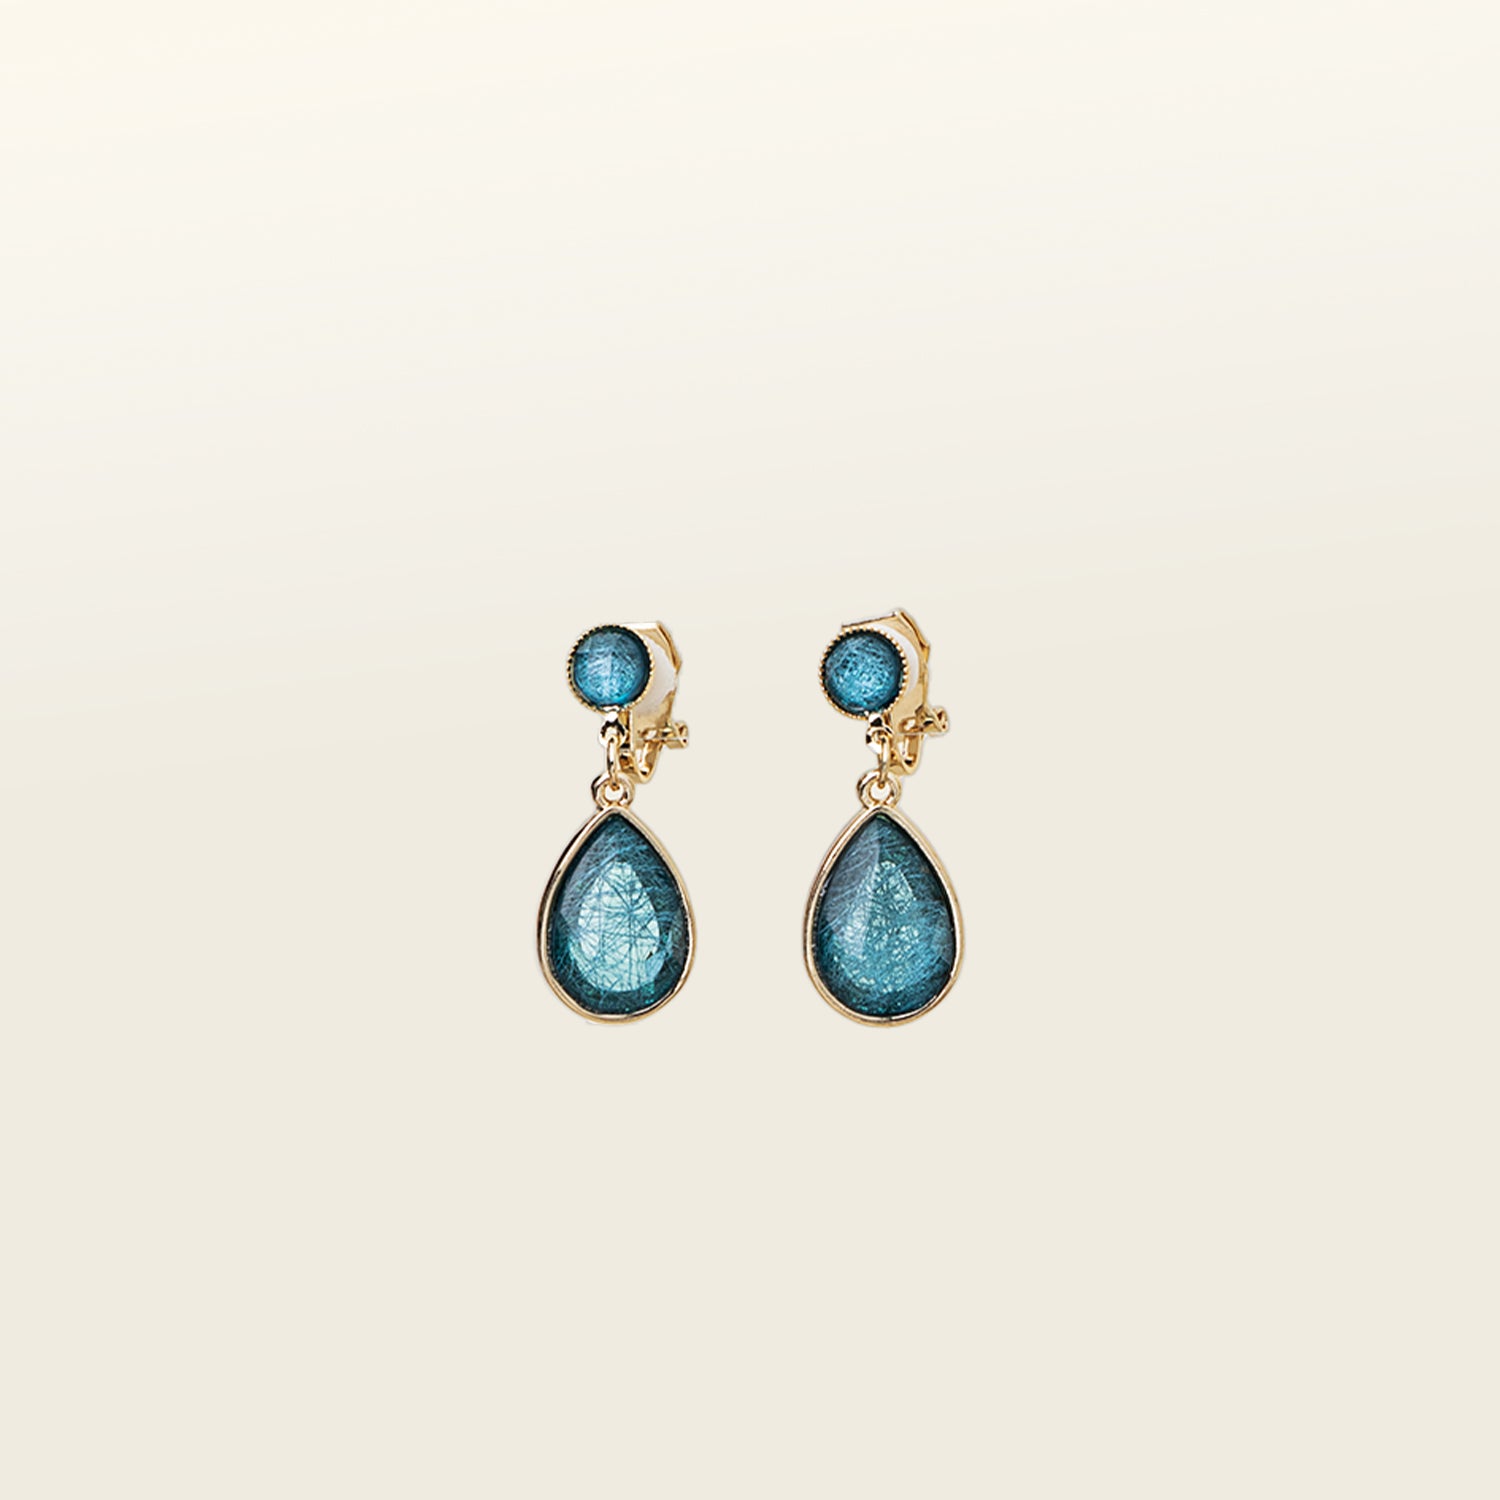 Image of the Sabrina Blue Tear Drop Clip-On Earrings feature a padded clip closure, making them ideal for all ear types. The earrings offer secure hold for up to 8-12 hours and are constructed of resin and gold tone plated zinc alloy. For extra comfort, the earrings come with removable rubber padding and cannot be adjusted for size. Please note, one package contains one pair of earrings.